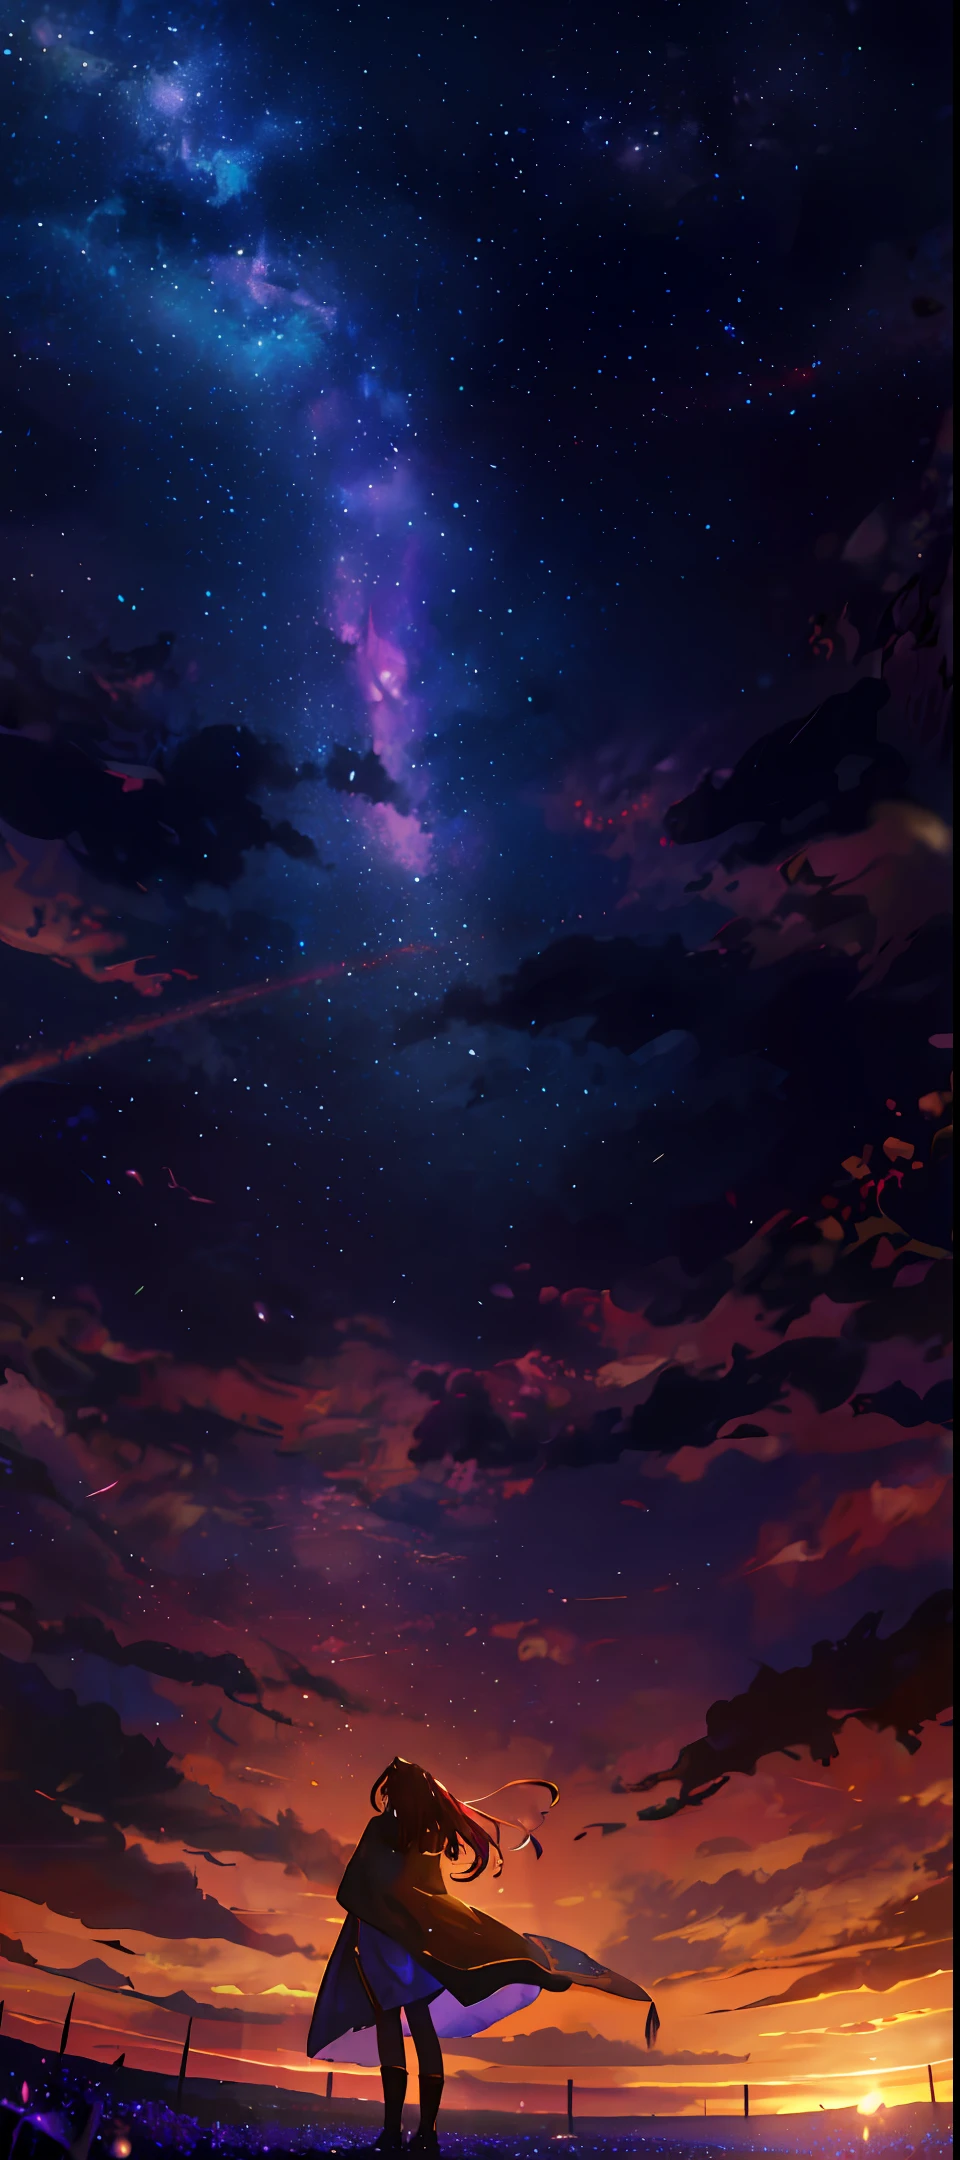 A wide landscape photo, (viewed from below, the sky is above, and the open field is below), a girl standing on a flower field looking up, (full moon: 1.2), (meteor: 0.9), (nebula: 1.3), distant mountains , Trees BREAK Crafting Art, (Warm Light: 1.2), (Firefly: 1.2), Lights, Lots of Purple and Orange, Intricate Details, Volumetric Lighting BREAK (Masterpiece: 1.2), (Best Quality), 4k, Ultra Detailed, (Dynamic Composition: 1.4), Rich in Detail and Color, (Rainbow Color: 1.2), (Glow, Atmospheric Lighting), Dreamy, Magical, (Solo: 1.2)